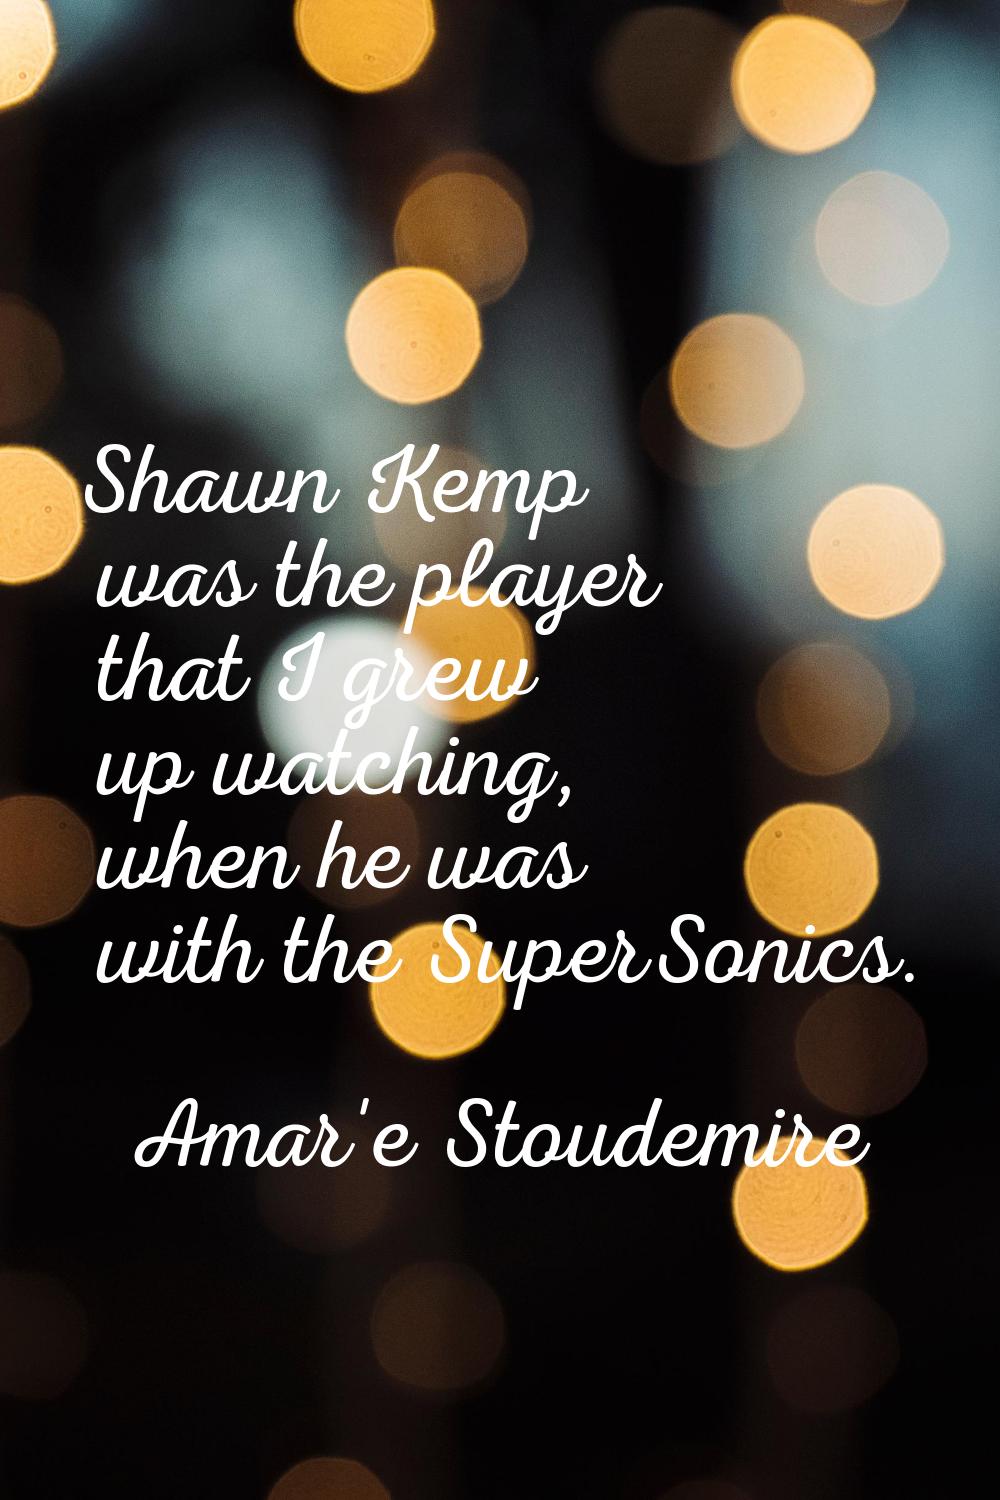 Shawn Kemp was the player that I grew up watching, when he was with the SuperSonics.